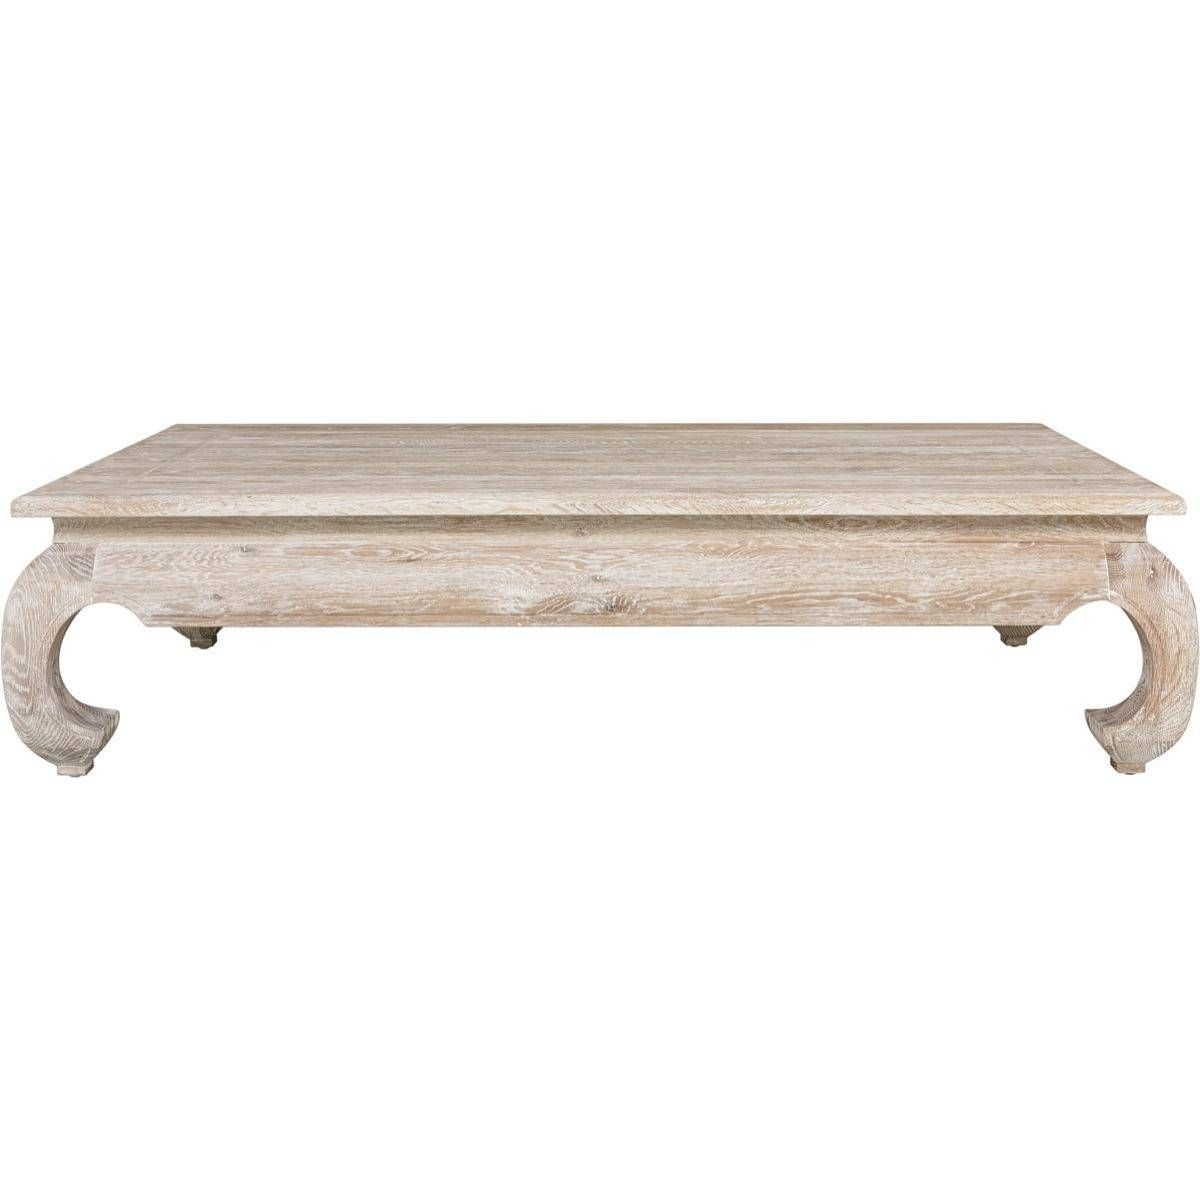 Washed Brown Opium Coffee Table | Safavieh Couture For Safavieh Coffee Tables (View 7 of 30)